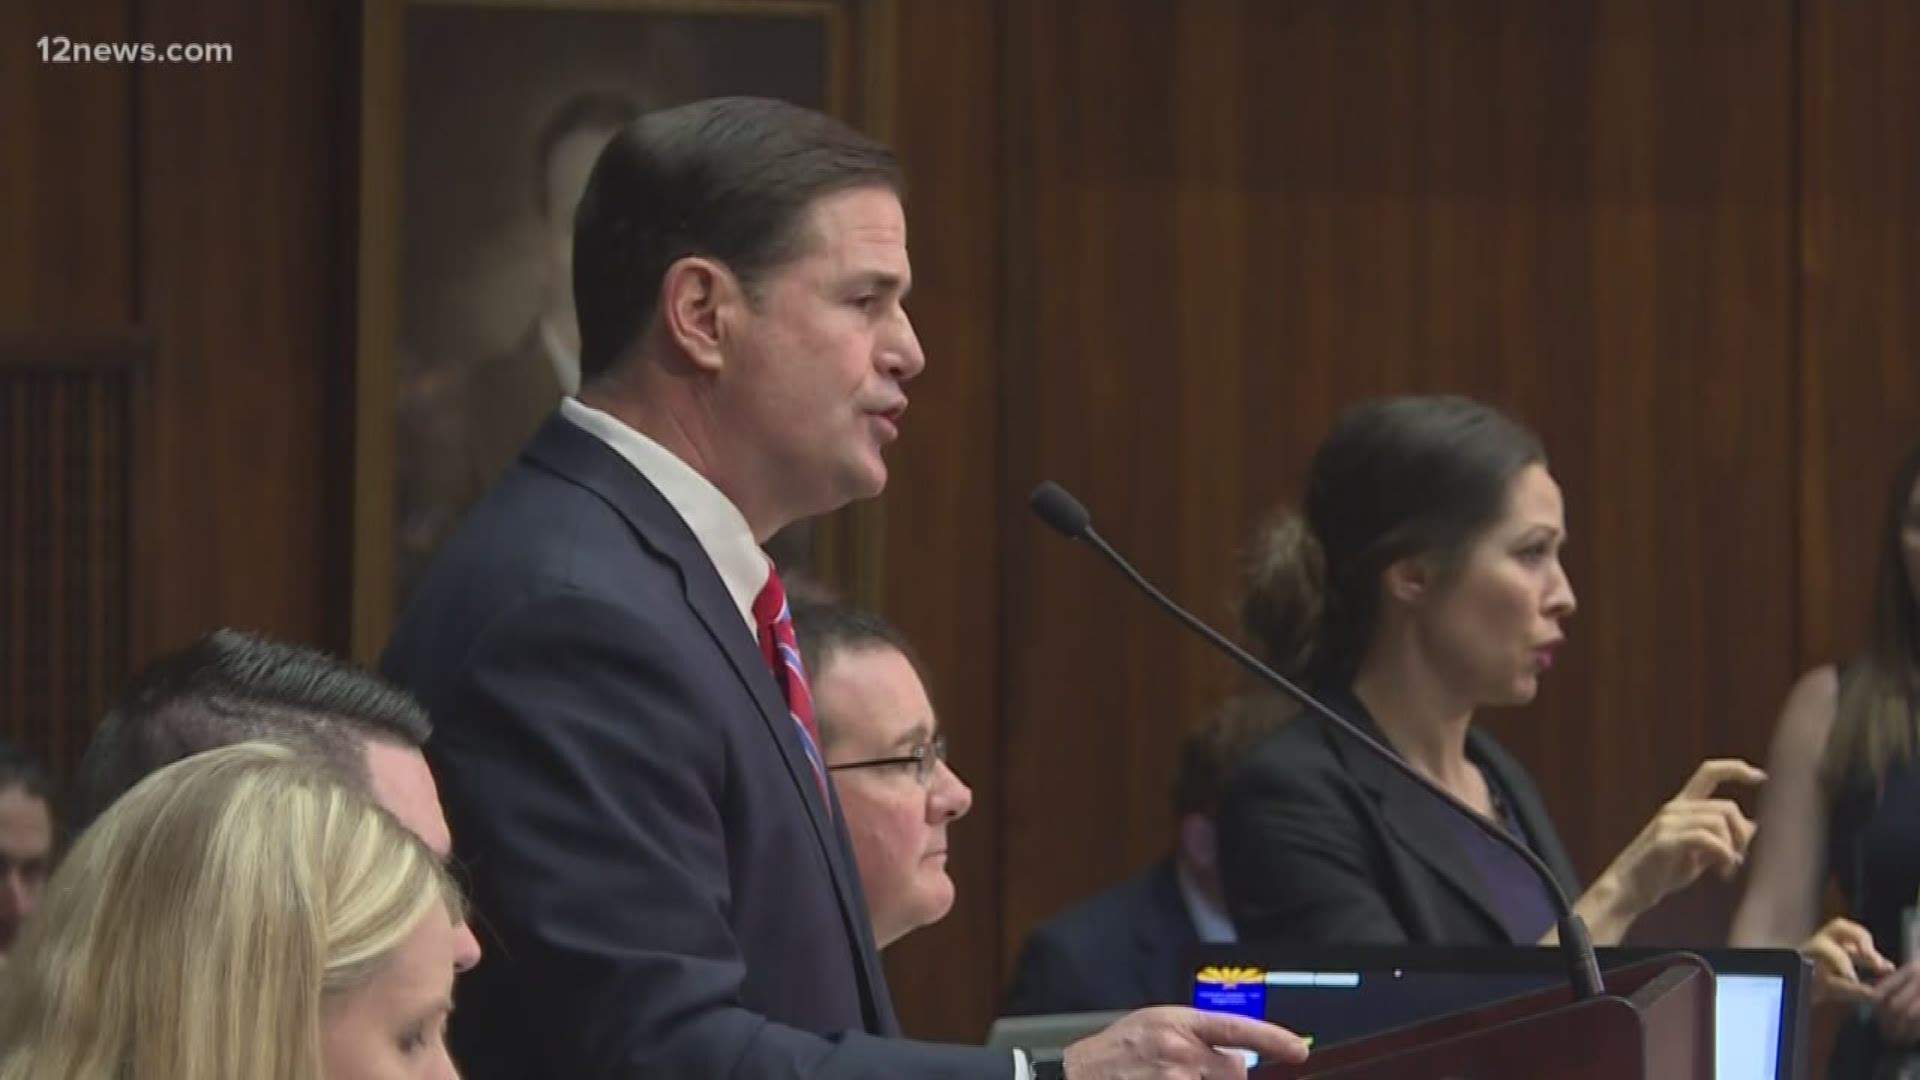 After Gov. Ducey made it clear during his State of the State address that school safety needed to be addressed this session, things are moving slowly.